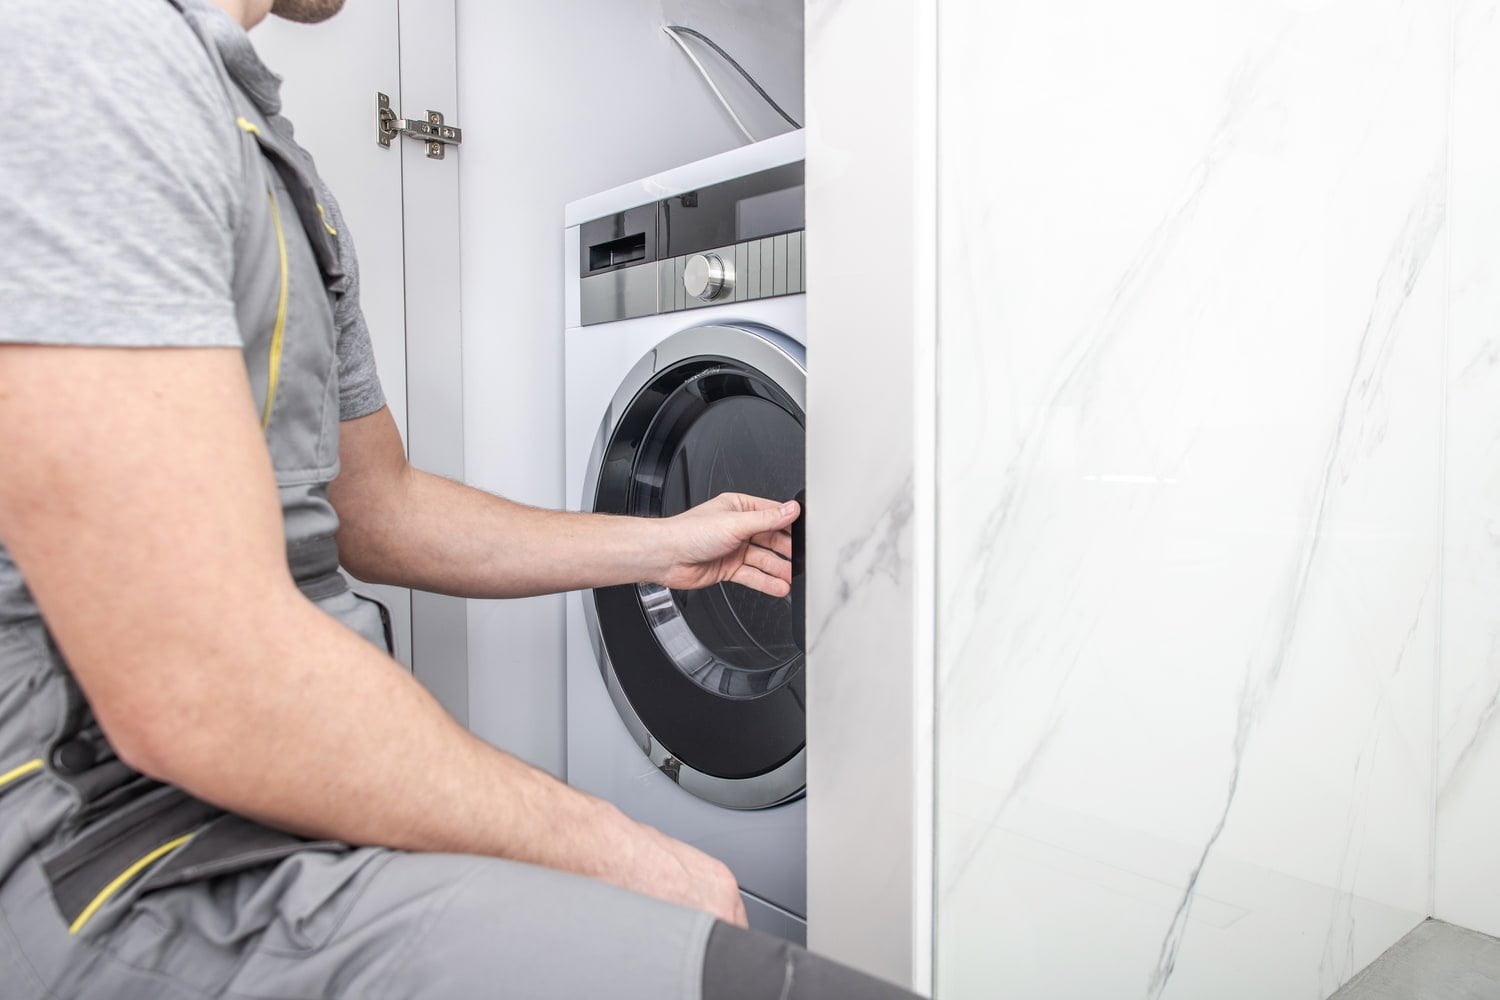 Washing Machine Installation Is Easier Than You Might Think!